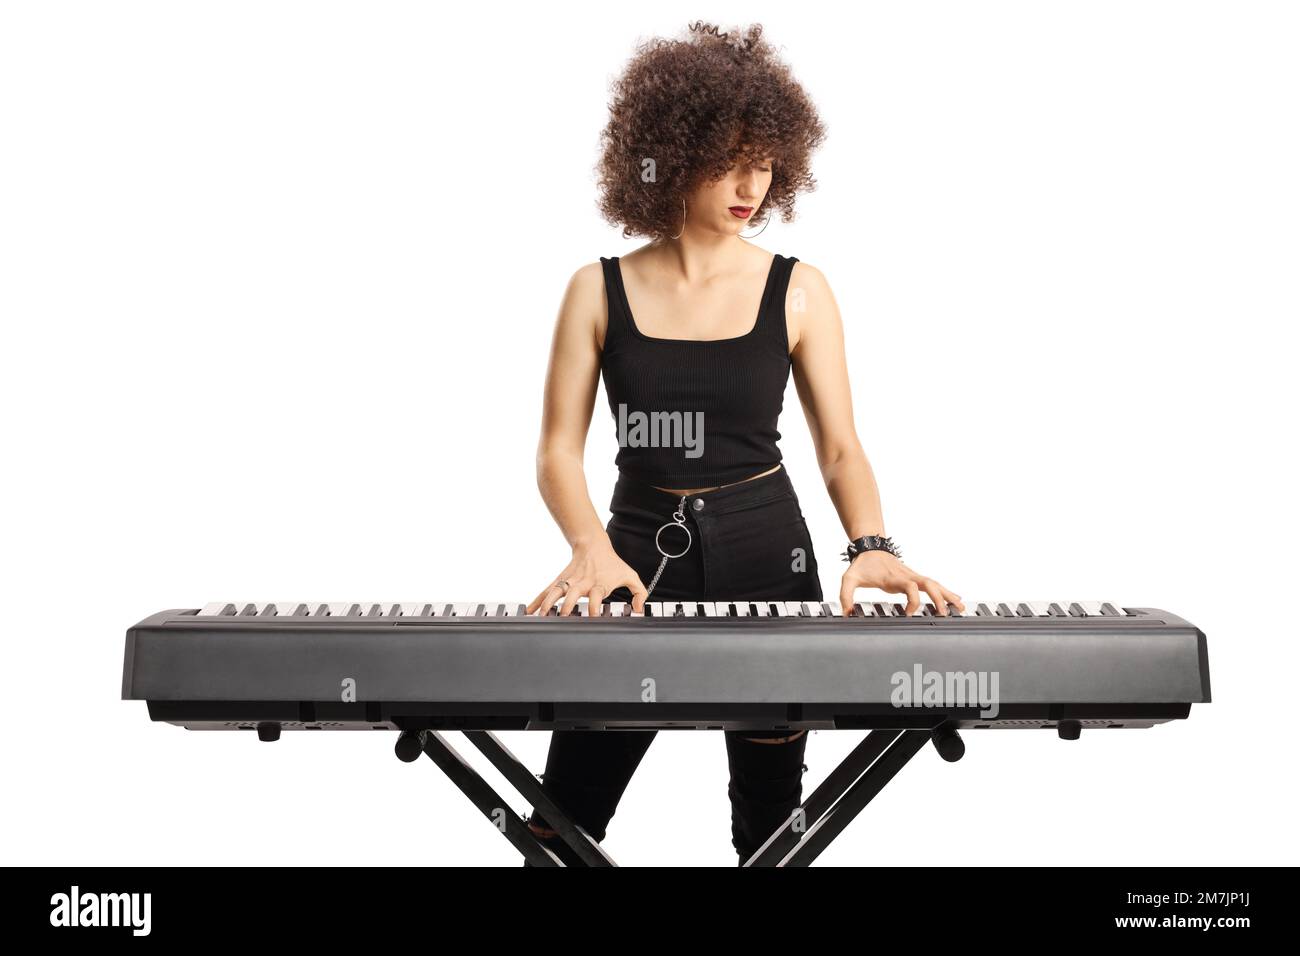 Girl playing piano Cut Out Stock Images & Pictures - Alamy